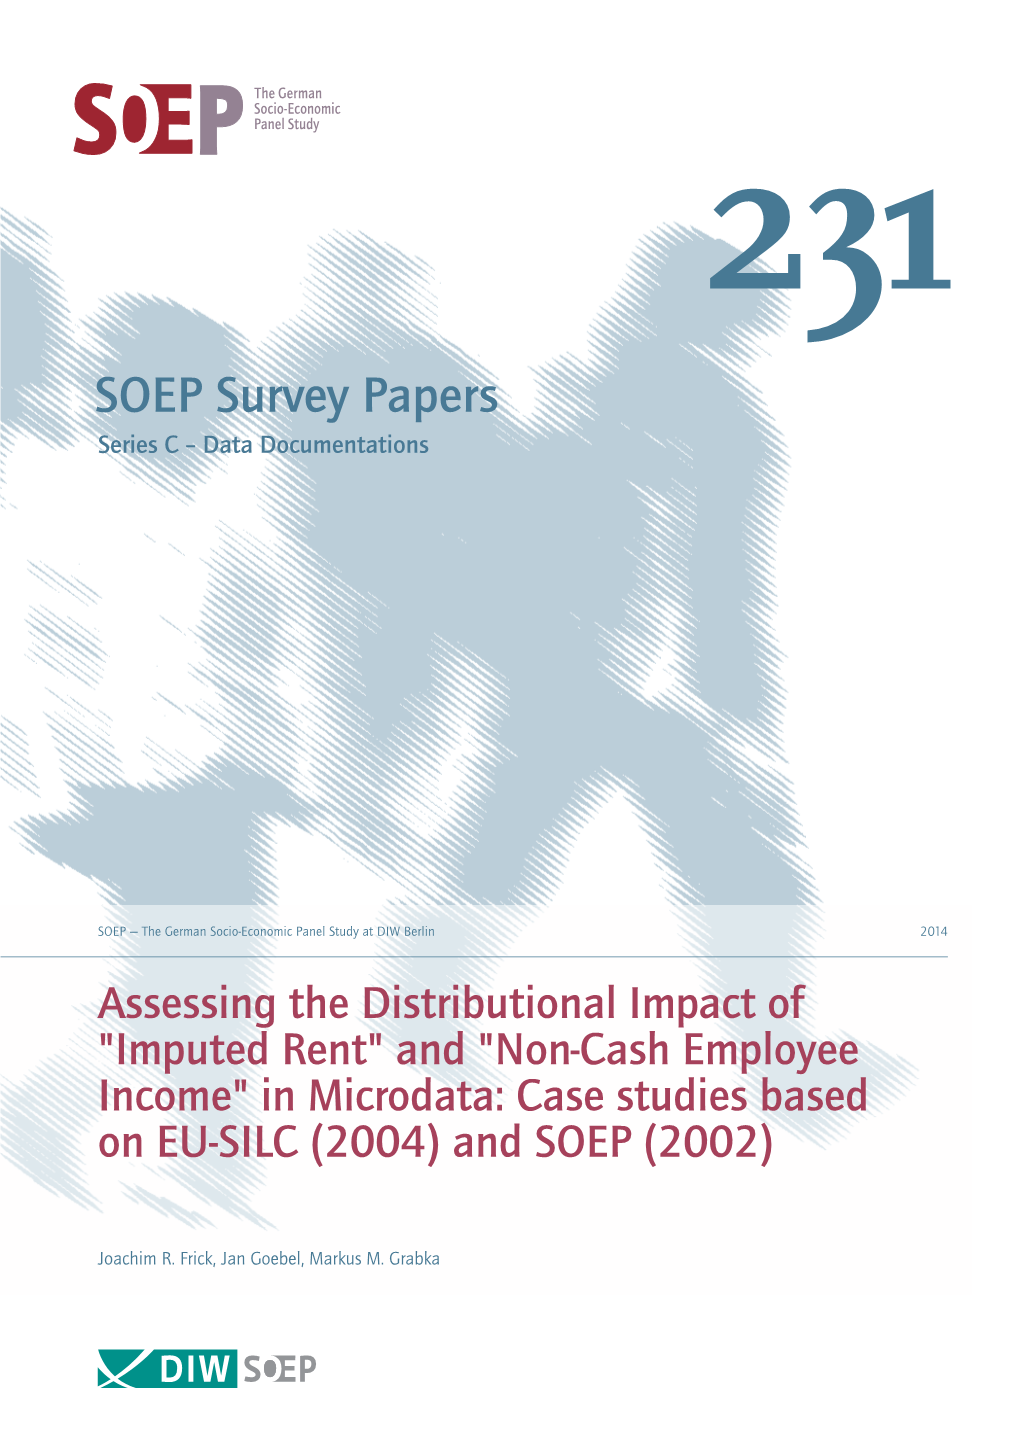 "Imputed Rent" and "Non-Cash Employee Income" in Microdata: Case Studies Based on EU-SILC (2004) and SOEP (2002)